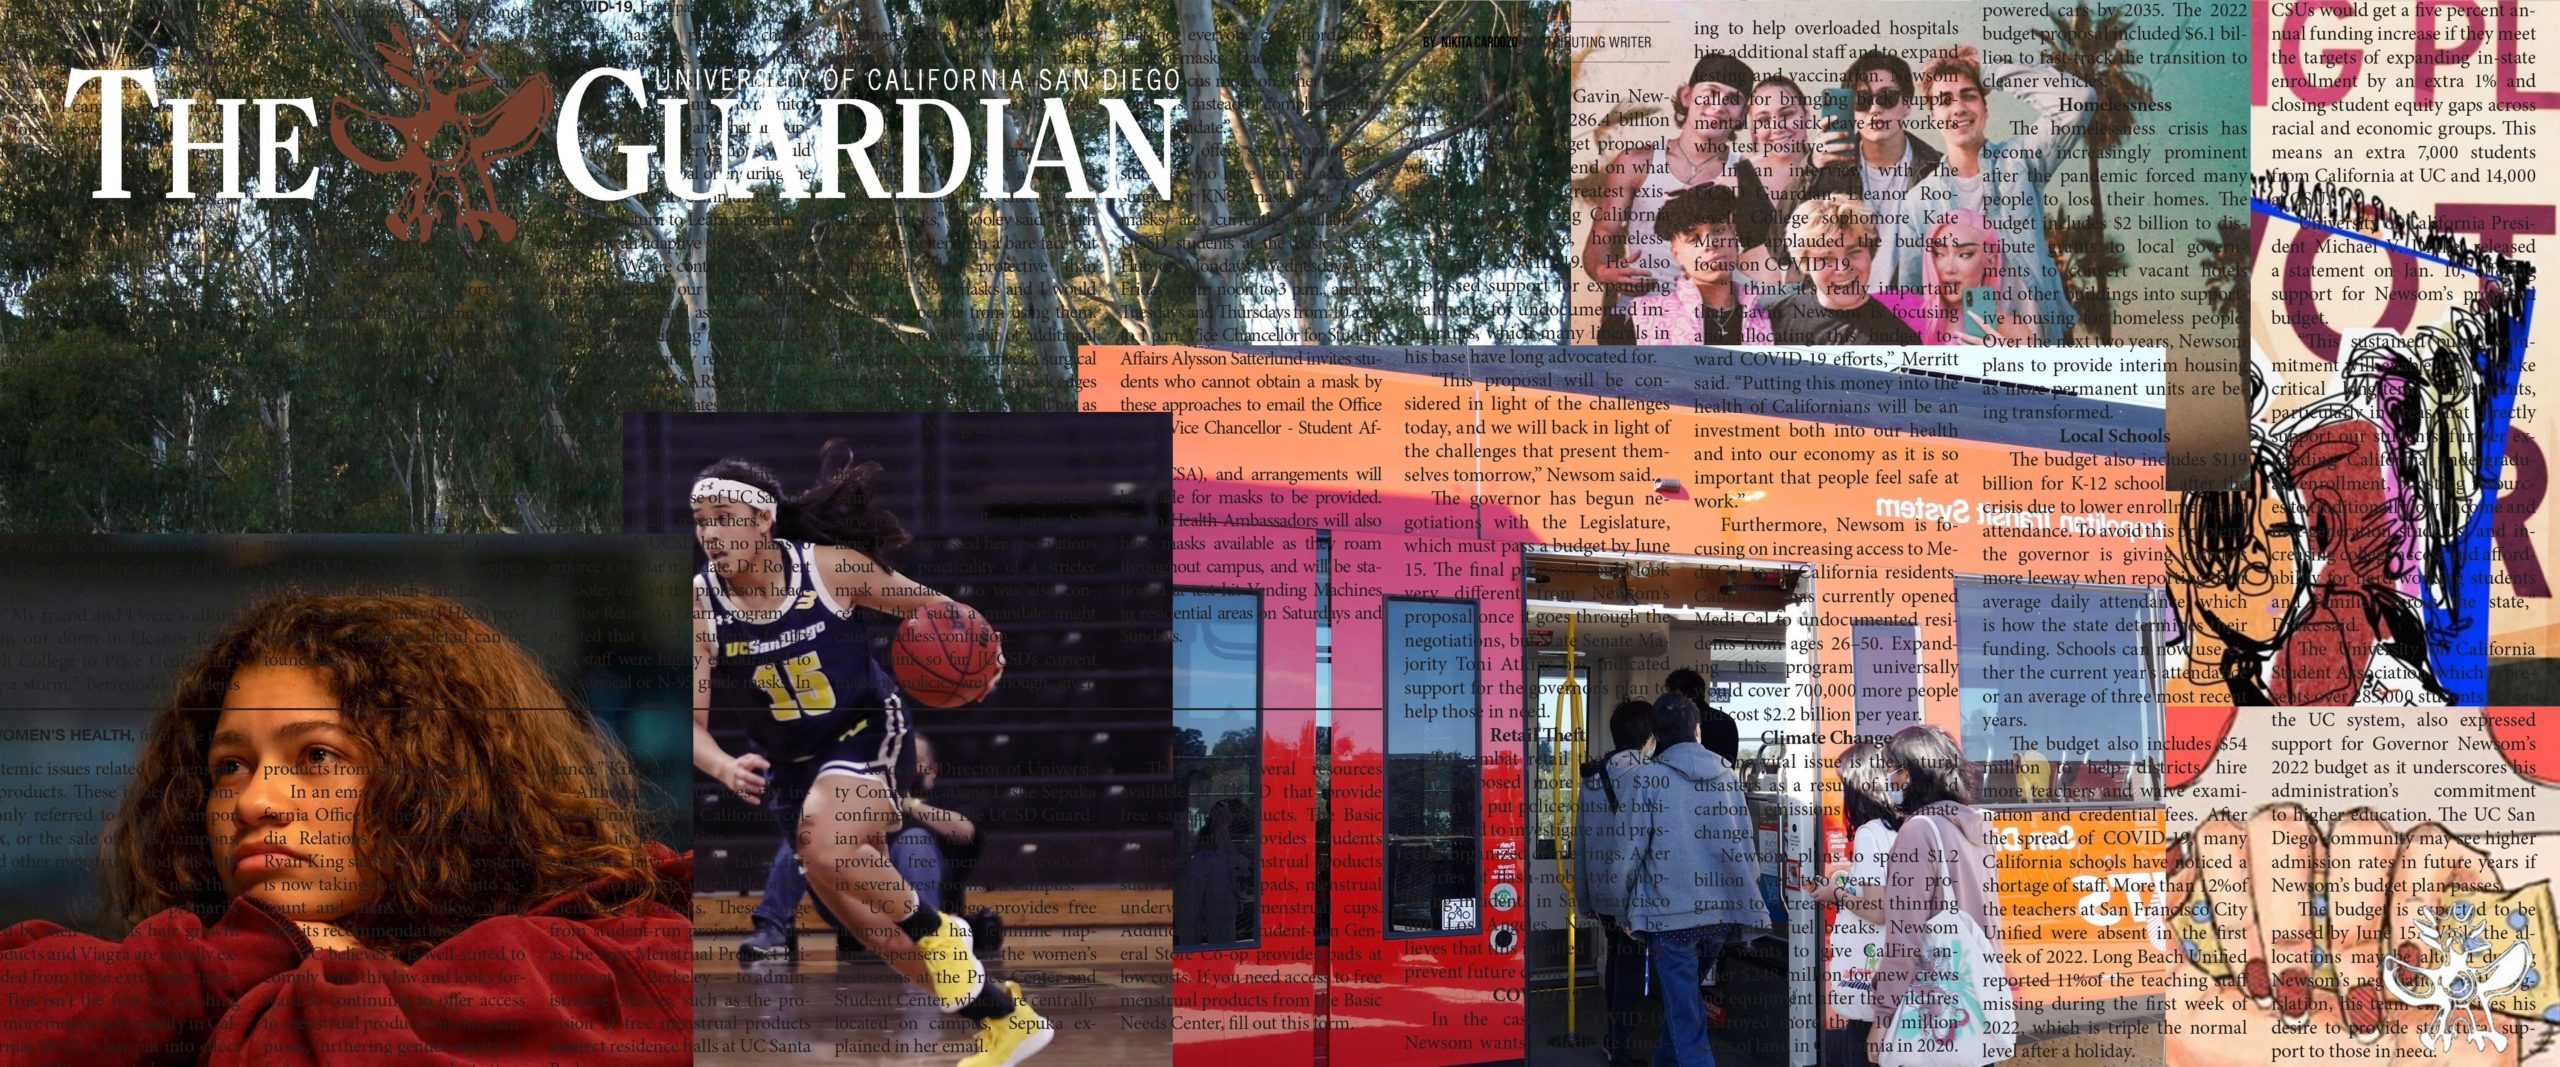 UCSD Guardian Vol. 55 Issue 14